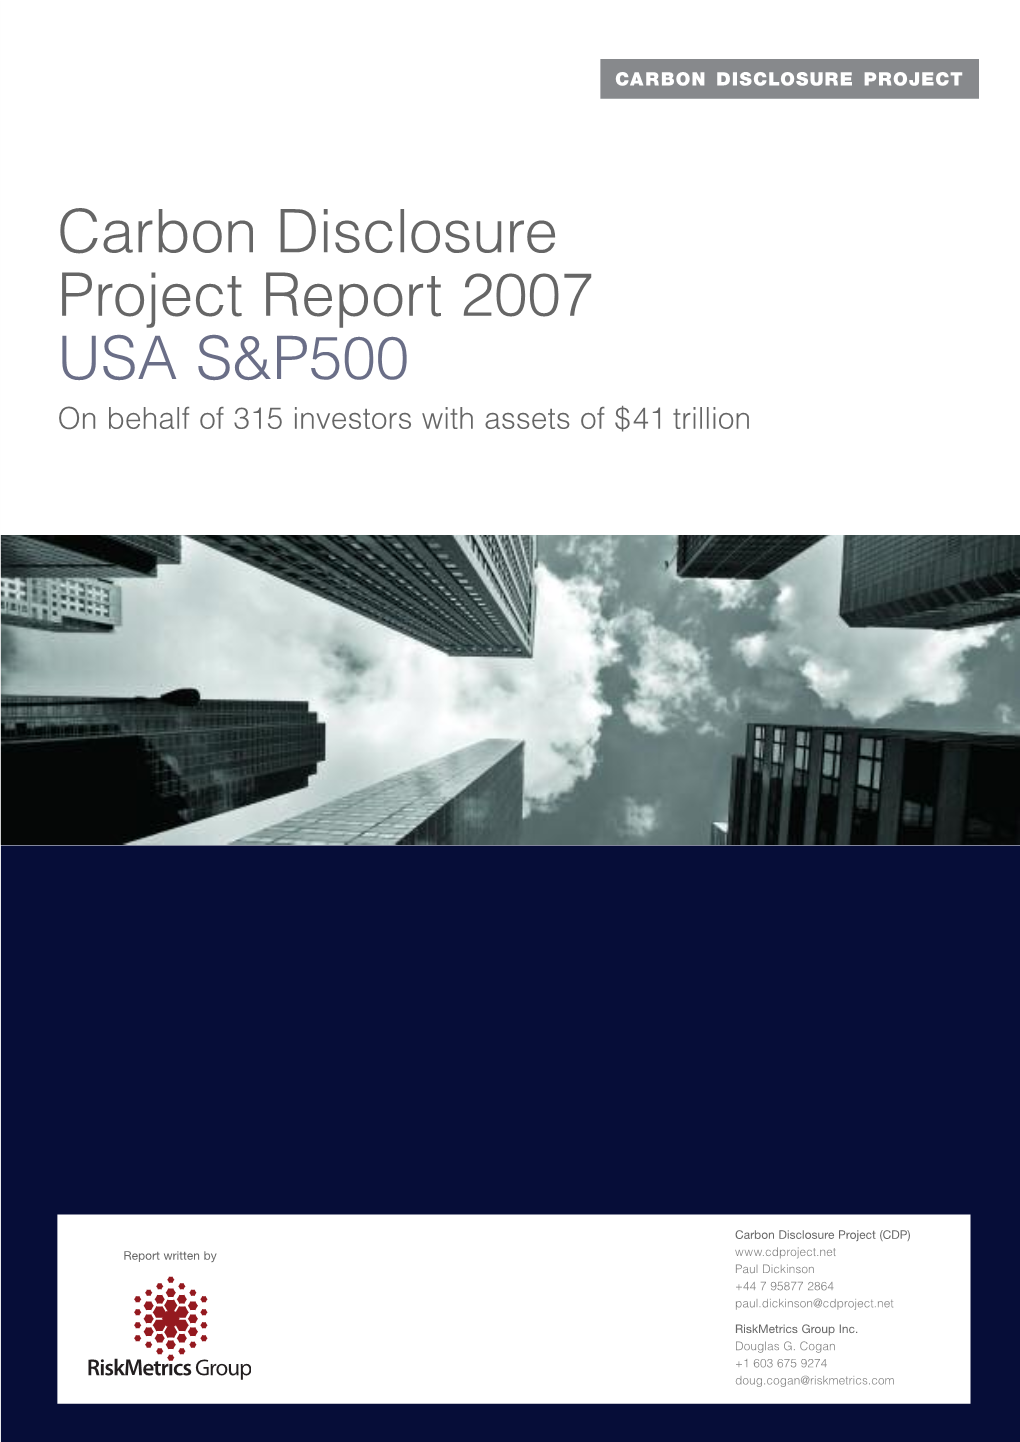 Carbon Disclosure Project Report 2007 USA S&P500 on Behalf of 315 Investors with Assets of $41 Trillion